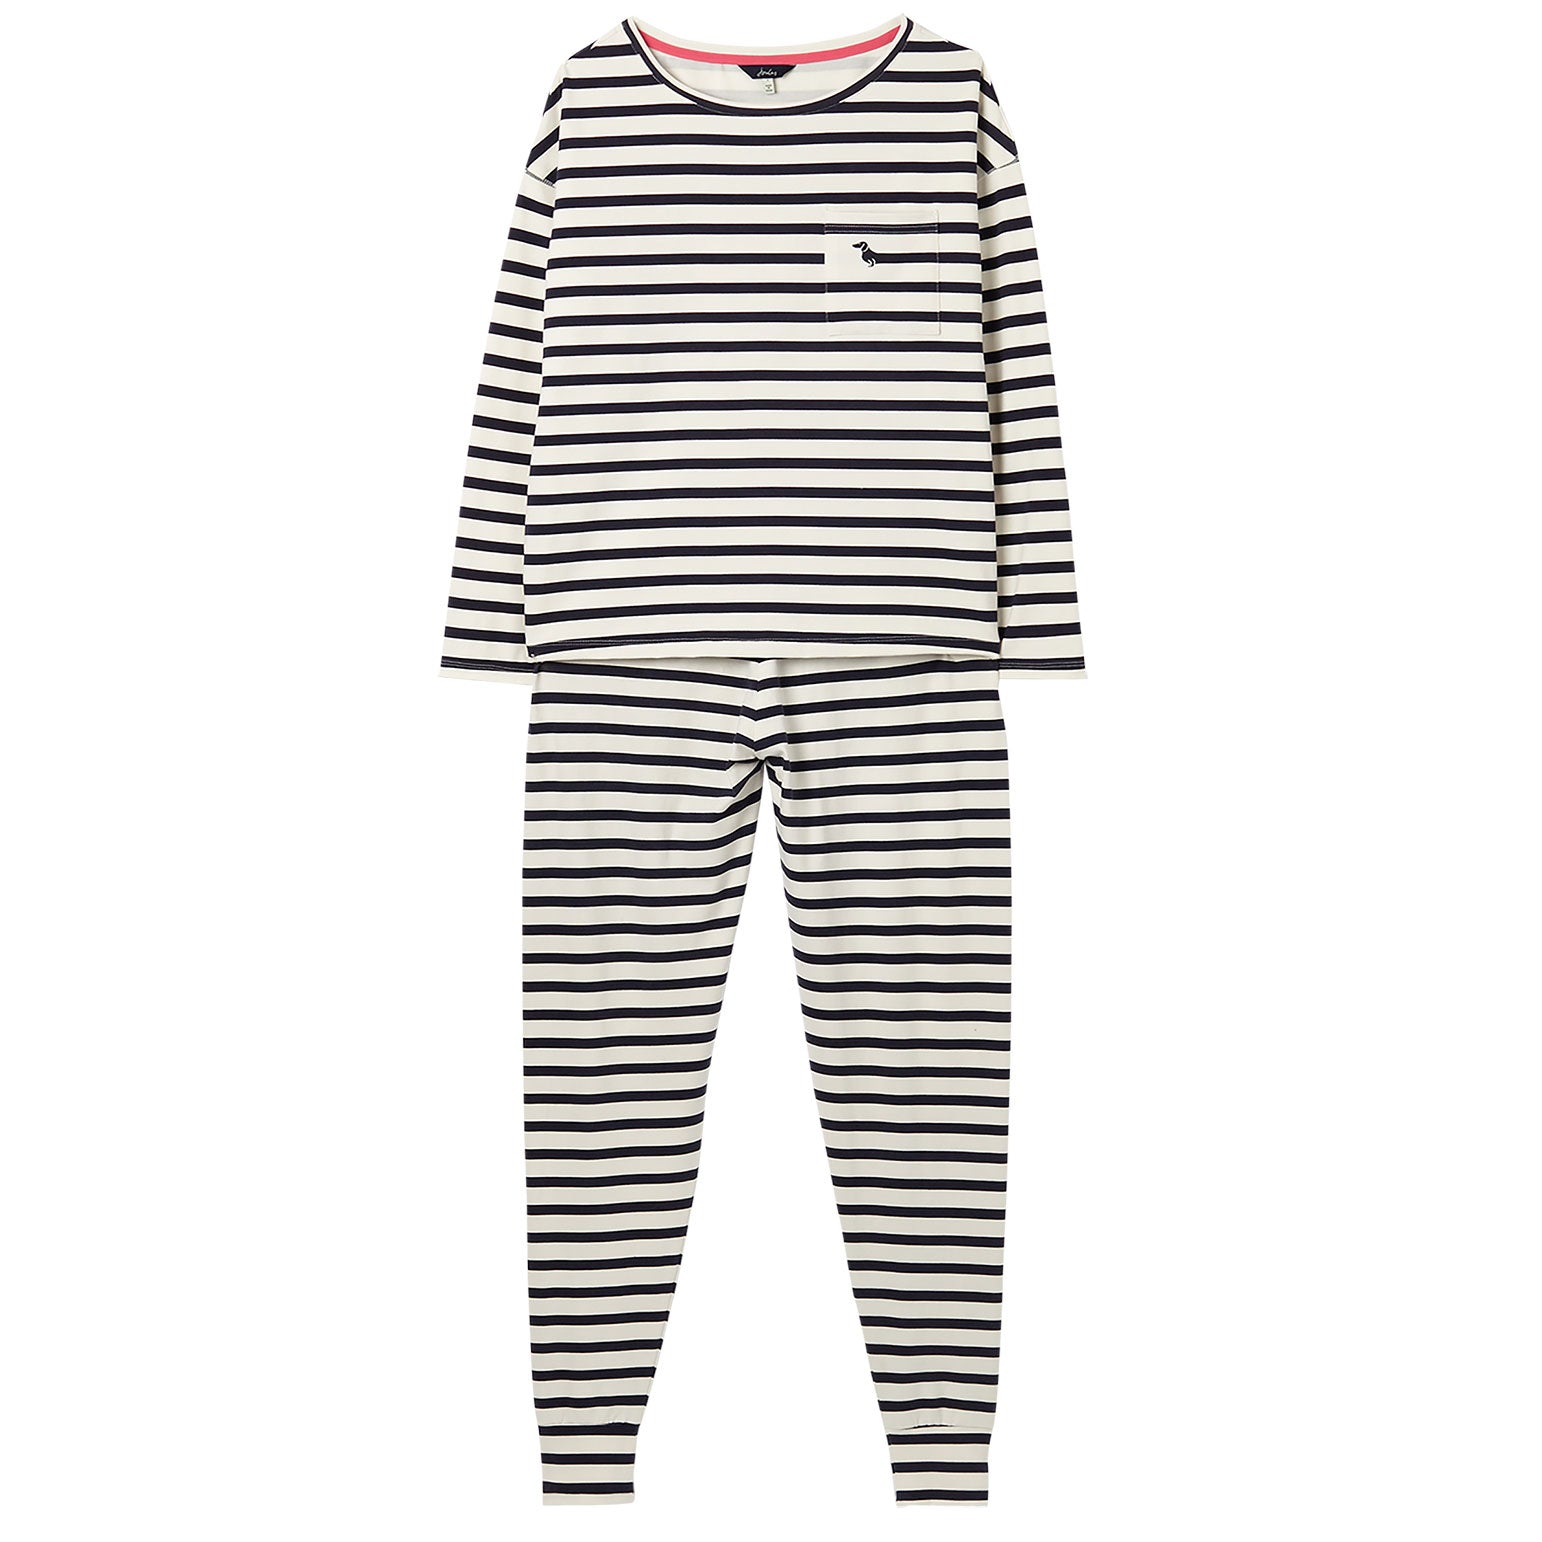 Joules| Joules UK|Joules Sale|Joules Outlet Online|Joules Clothing